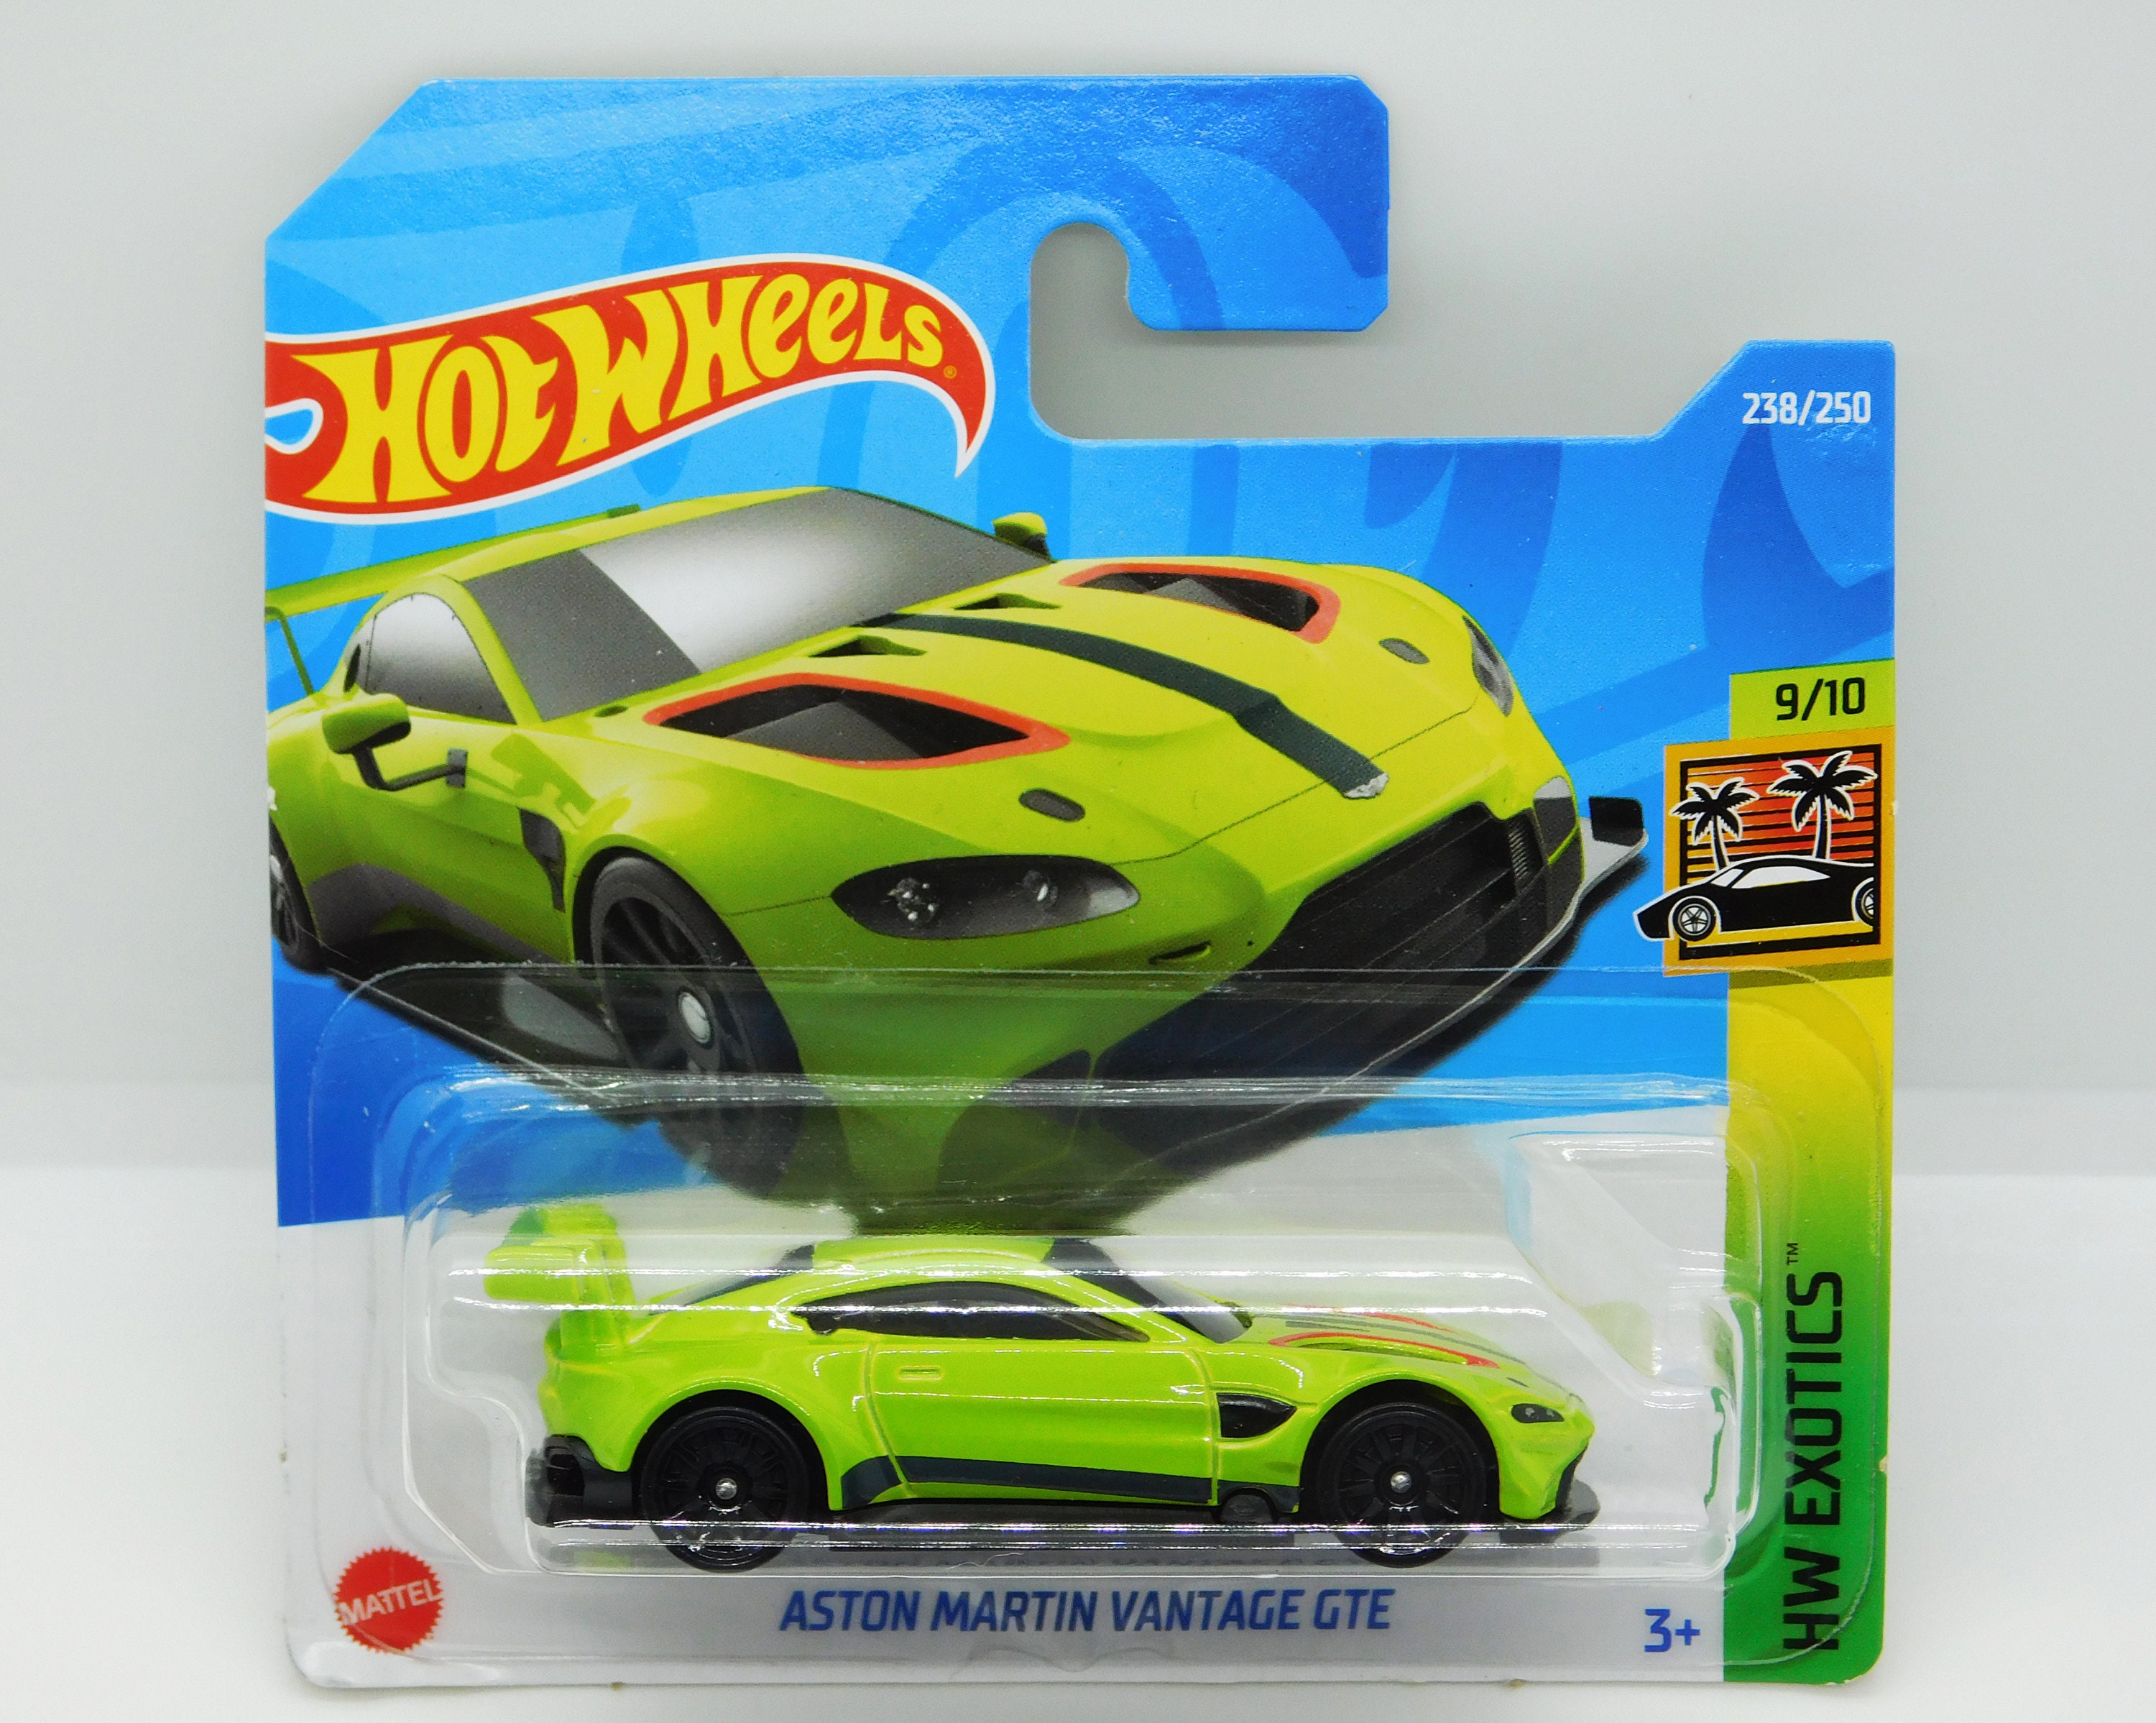 Hot Wheels Aston Martin Vantage Gte Rare Miniature Collectible Model  ,geschenk ..WORLDWIDE Shipping With Tracking Number EVERY DAY 